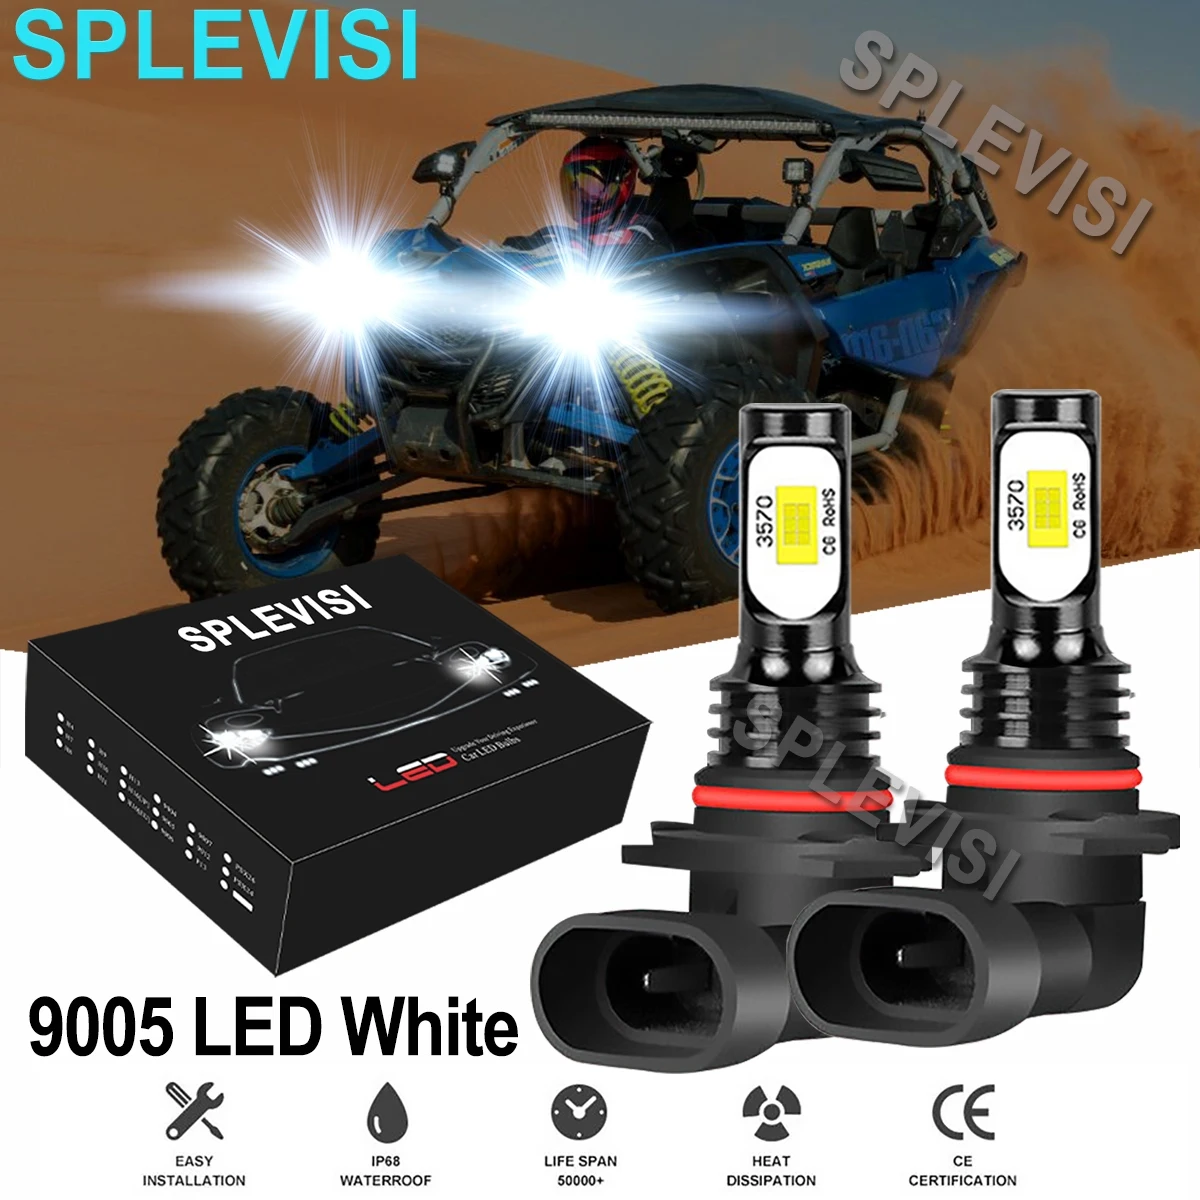 2x70W 6000k pure white LED Headlights Kit For Can Am Commander 1000 2011 2012 2013 2014 2015 2016 2017 2018 2019 1000R 2018-2019